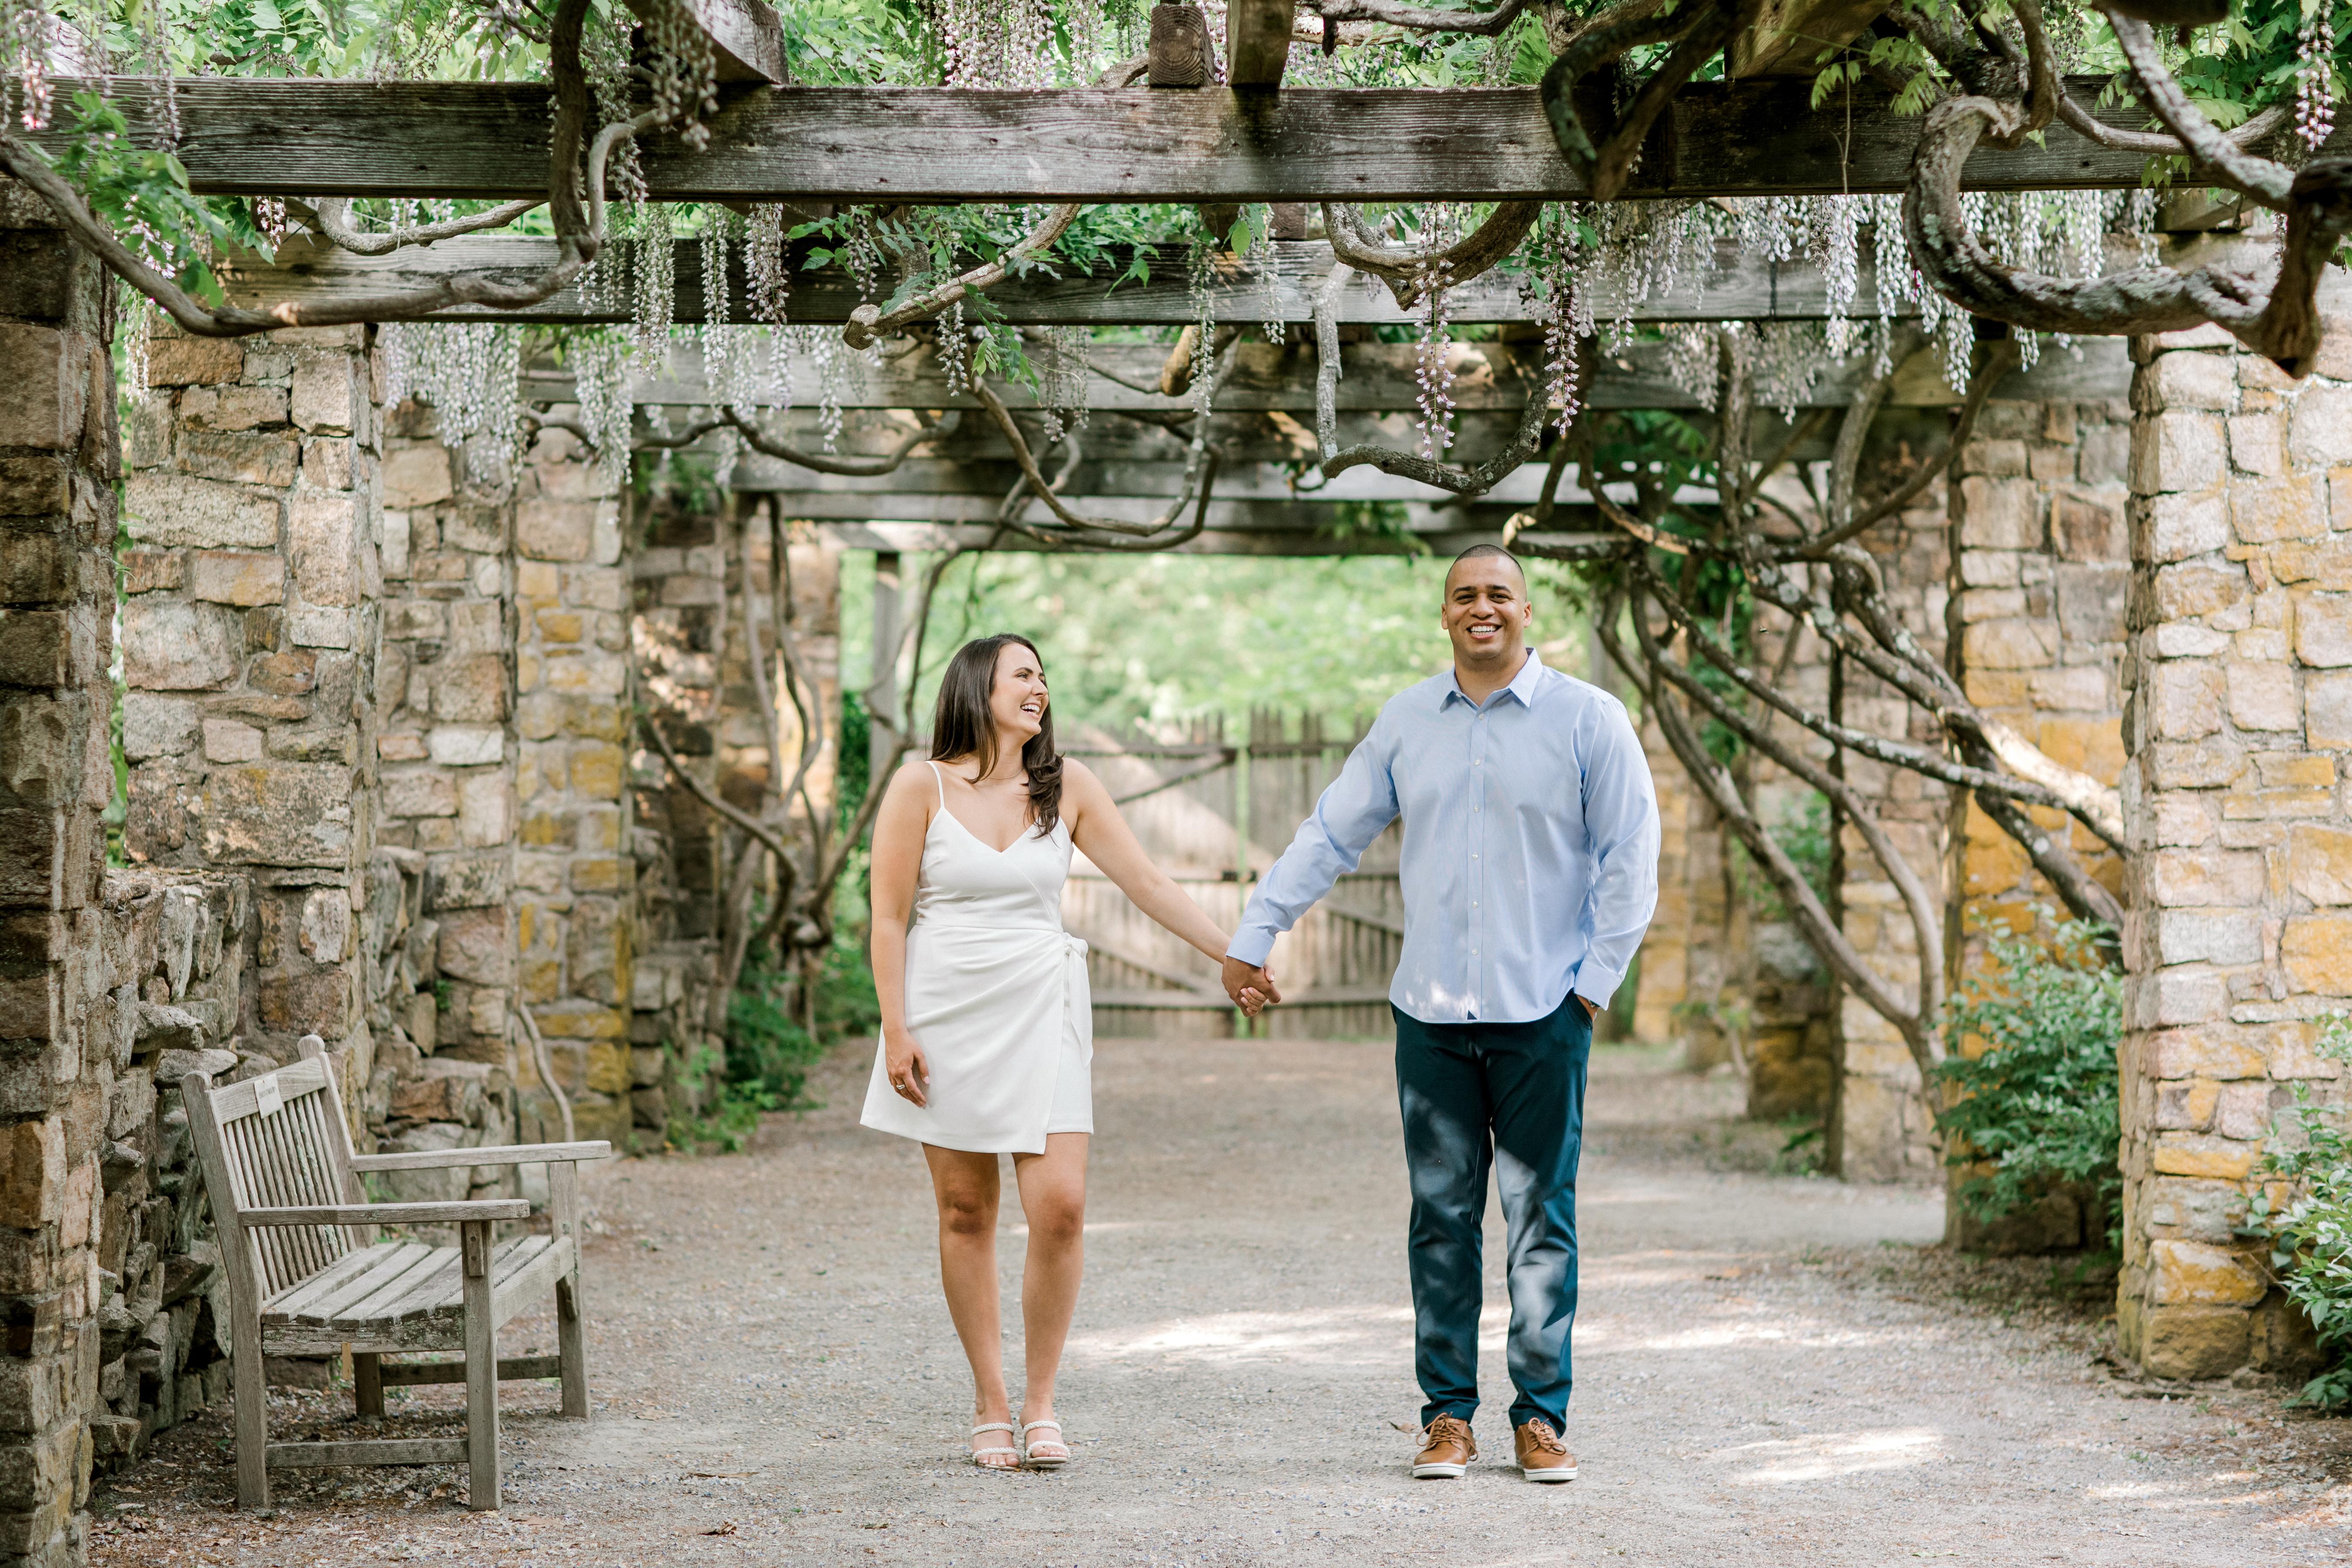 The Wedding Website of Kelly Grace Cannan and Kevin Alexander Galeano